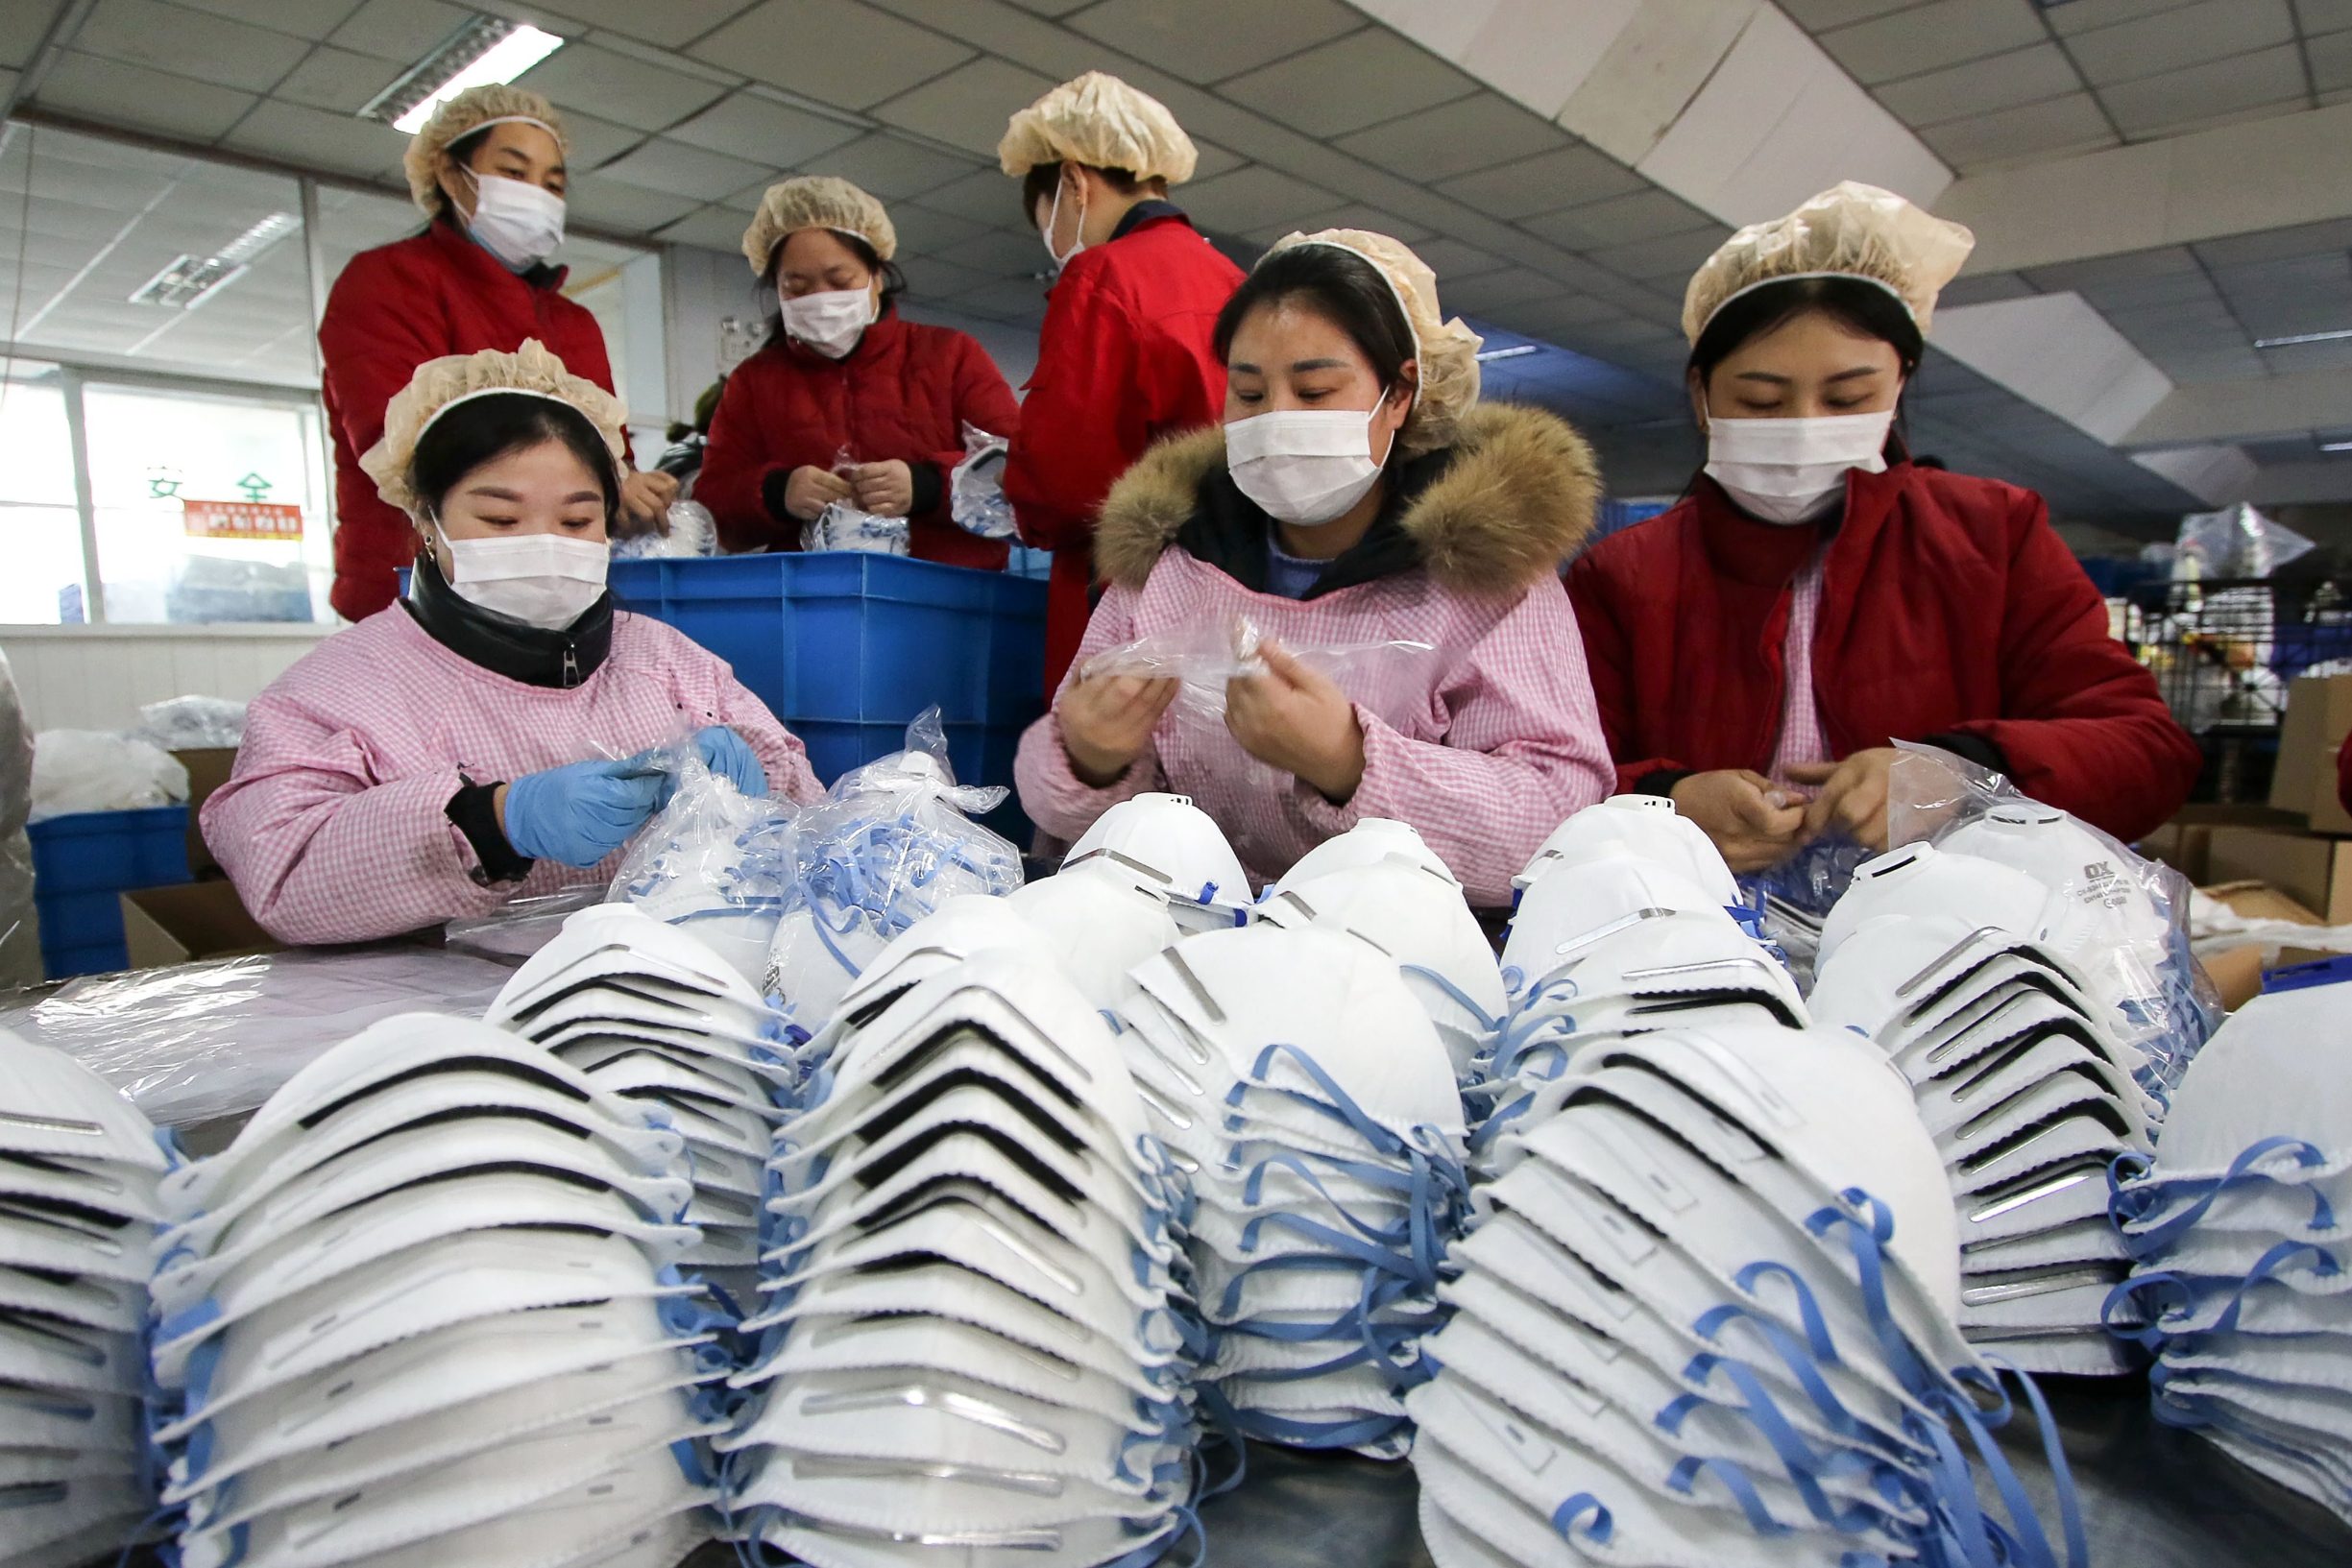 This photo taken on January 22, 2020 shows workers producing facemasks at a factory in Handan in China's northern Hebei province. - China banned trains and planes from leaving Wuhan at the centre of a virus outbreak on January 23, seeking to seal off its 11 million people to contain the contagious disease that has claimed 17 lives, infected hundreds and spread to other countries. (Photo by STR / AFP) / China OUT